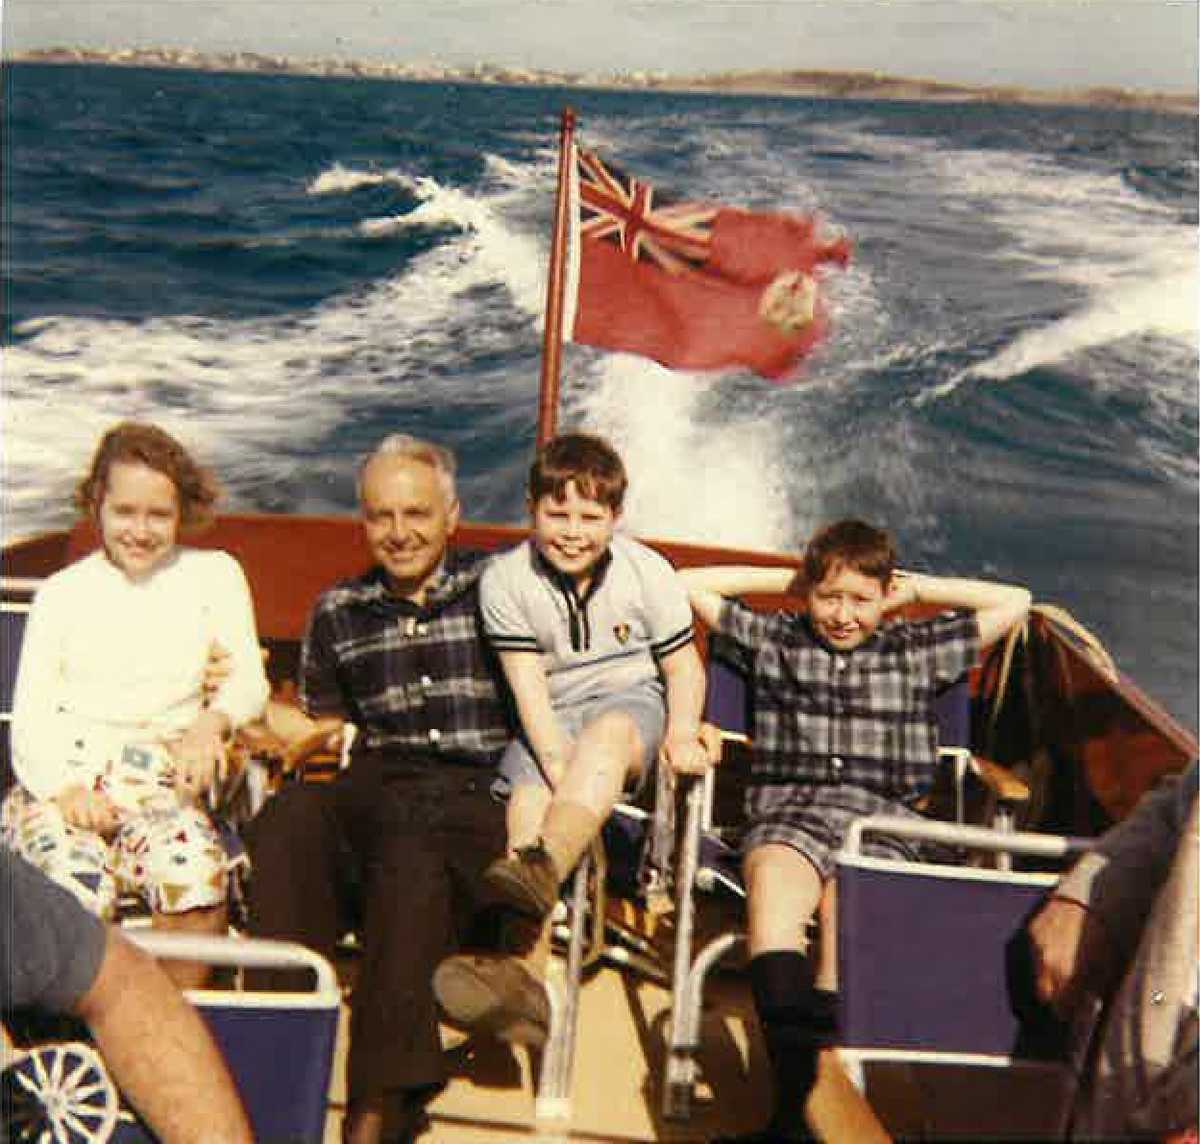 Tom Slick and his children enjoying a boat ride in the Bahamas